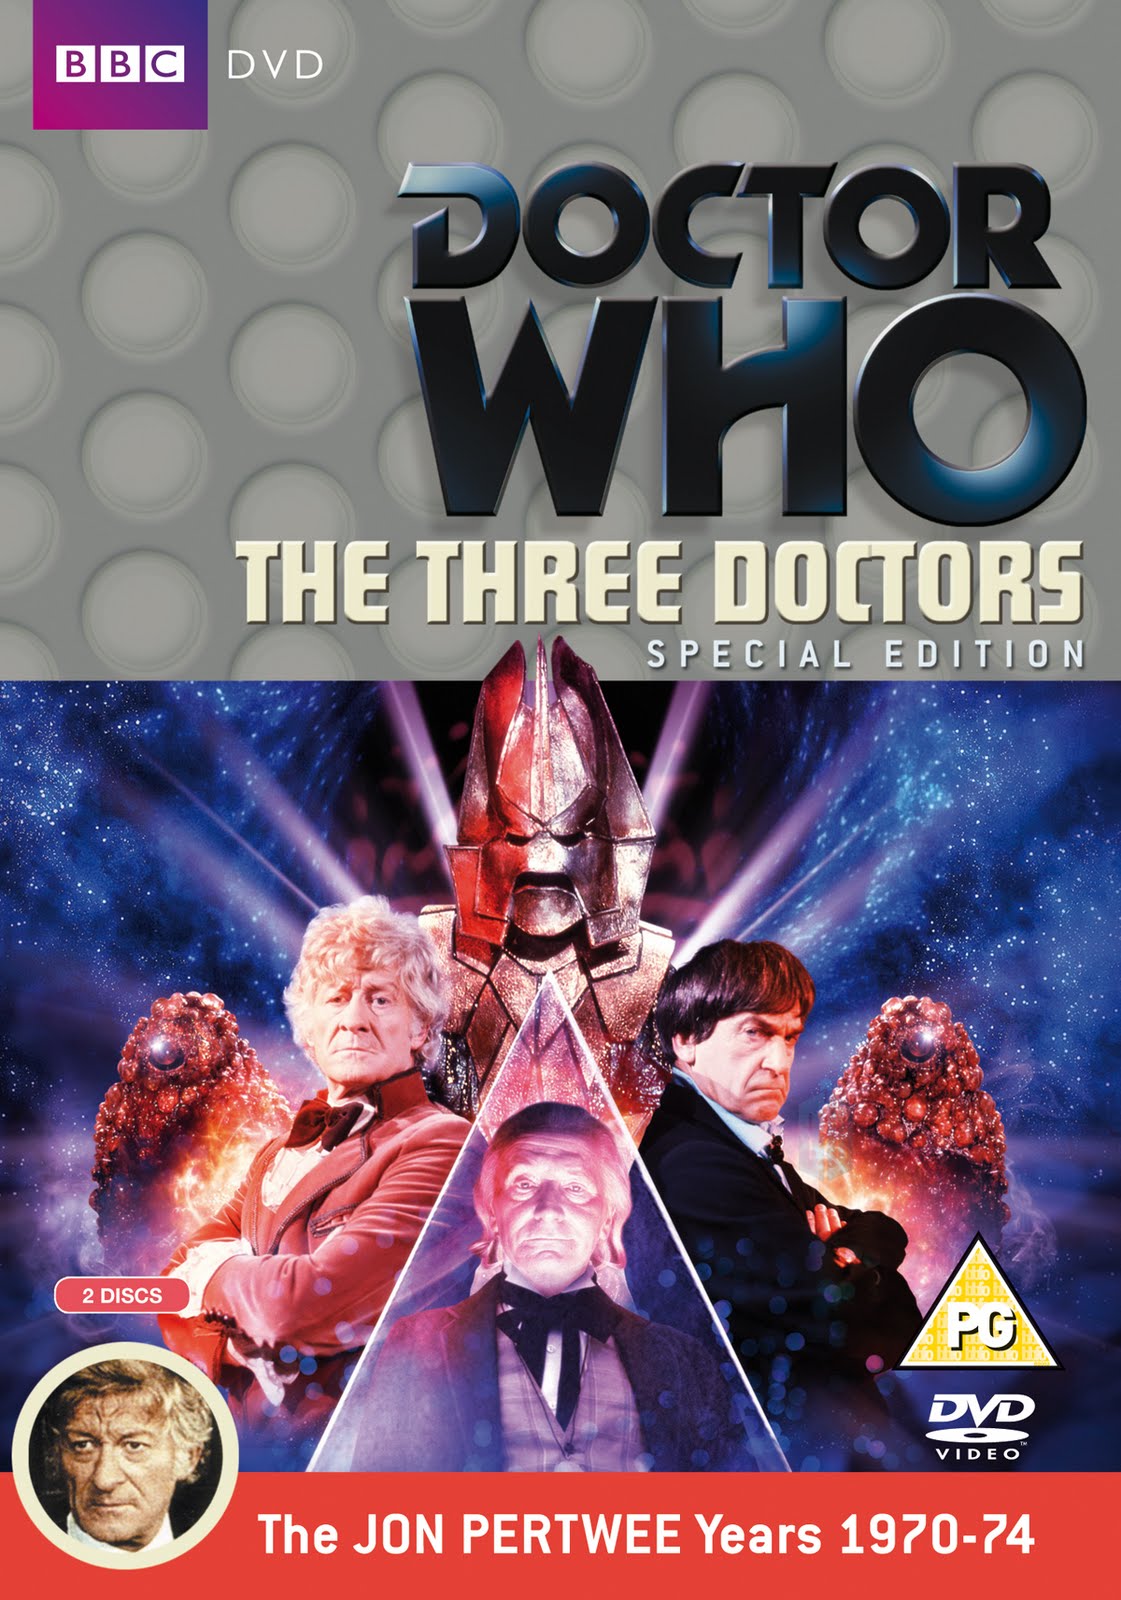 The Three Doctors: Special Edition, Doctor Who DVD Special Features Index  Wiki